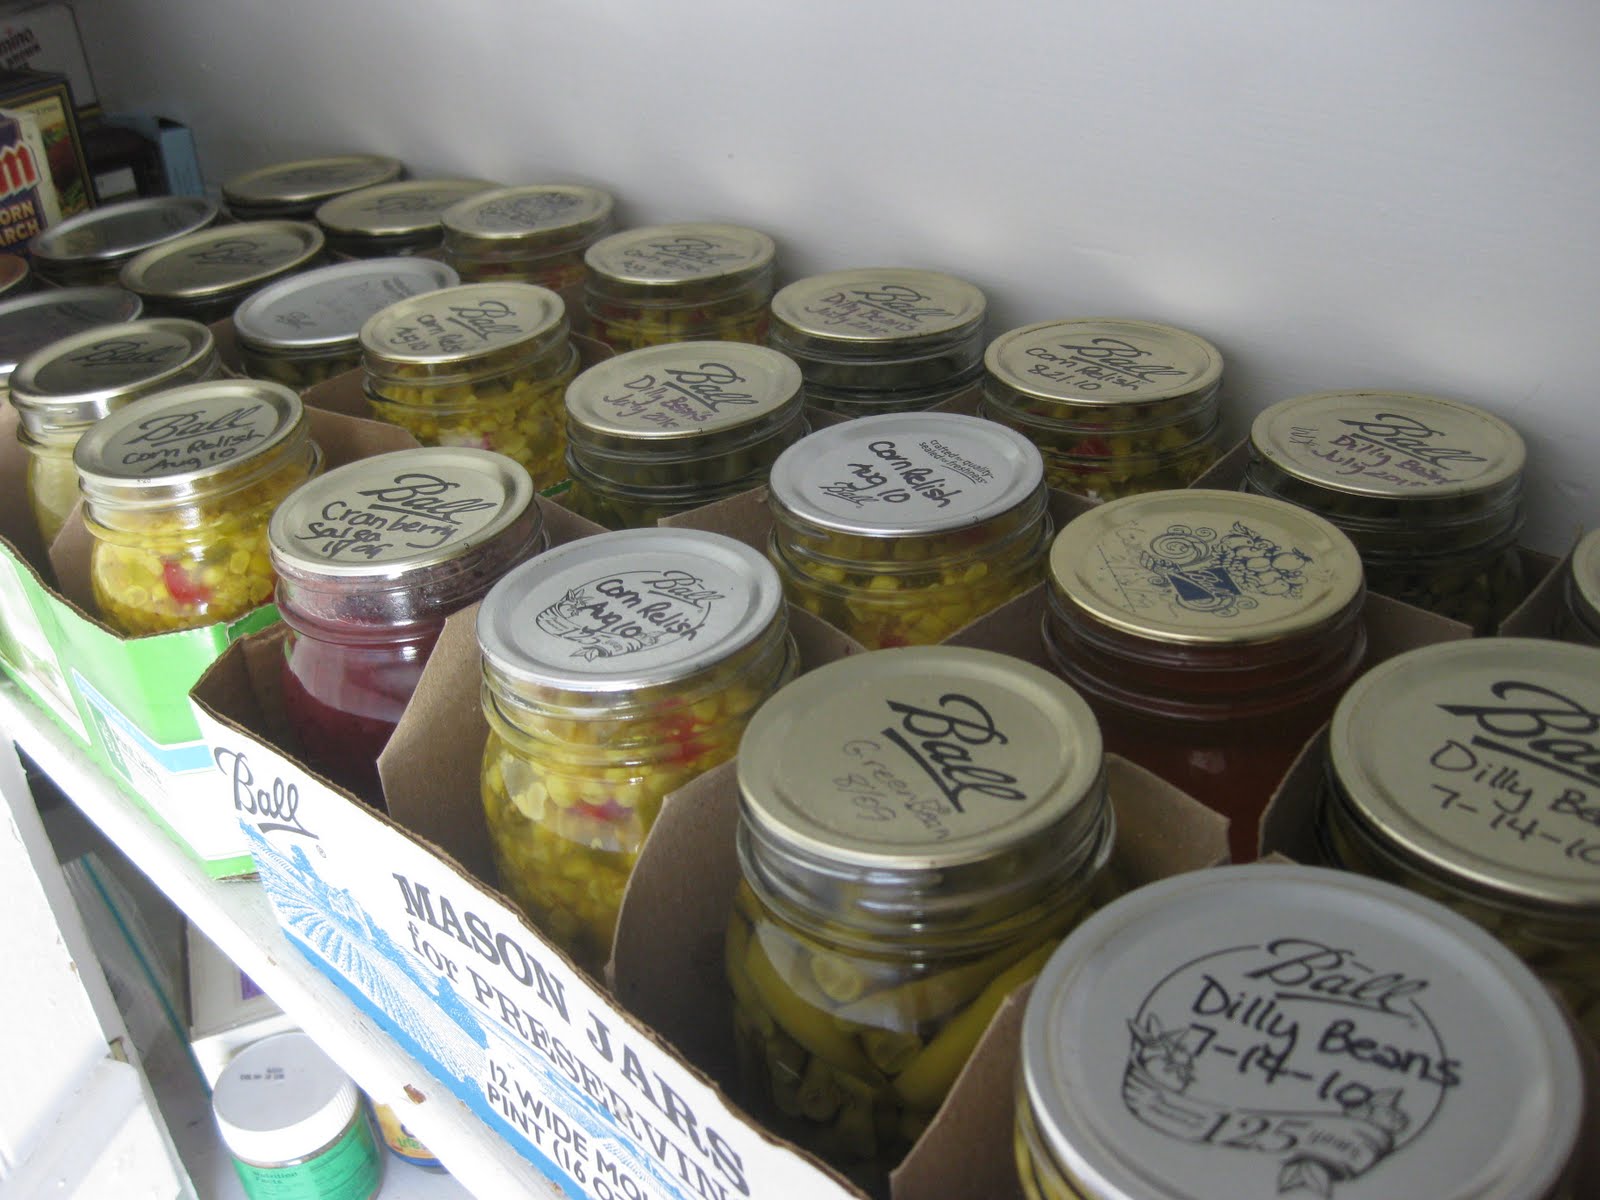 7 Better Ways to Store All of Your Canned Goods